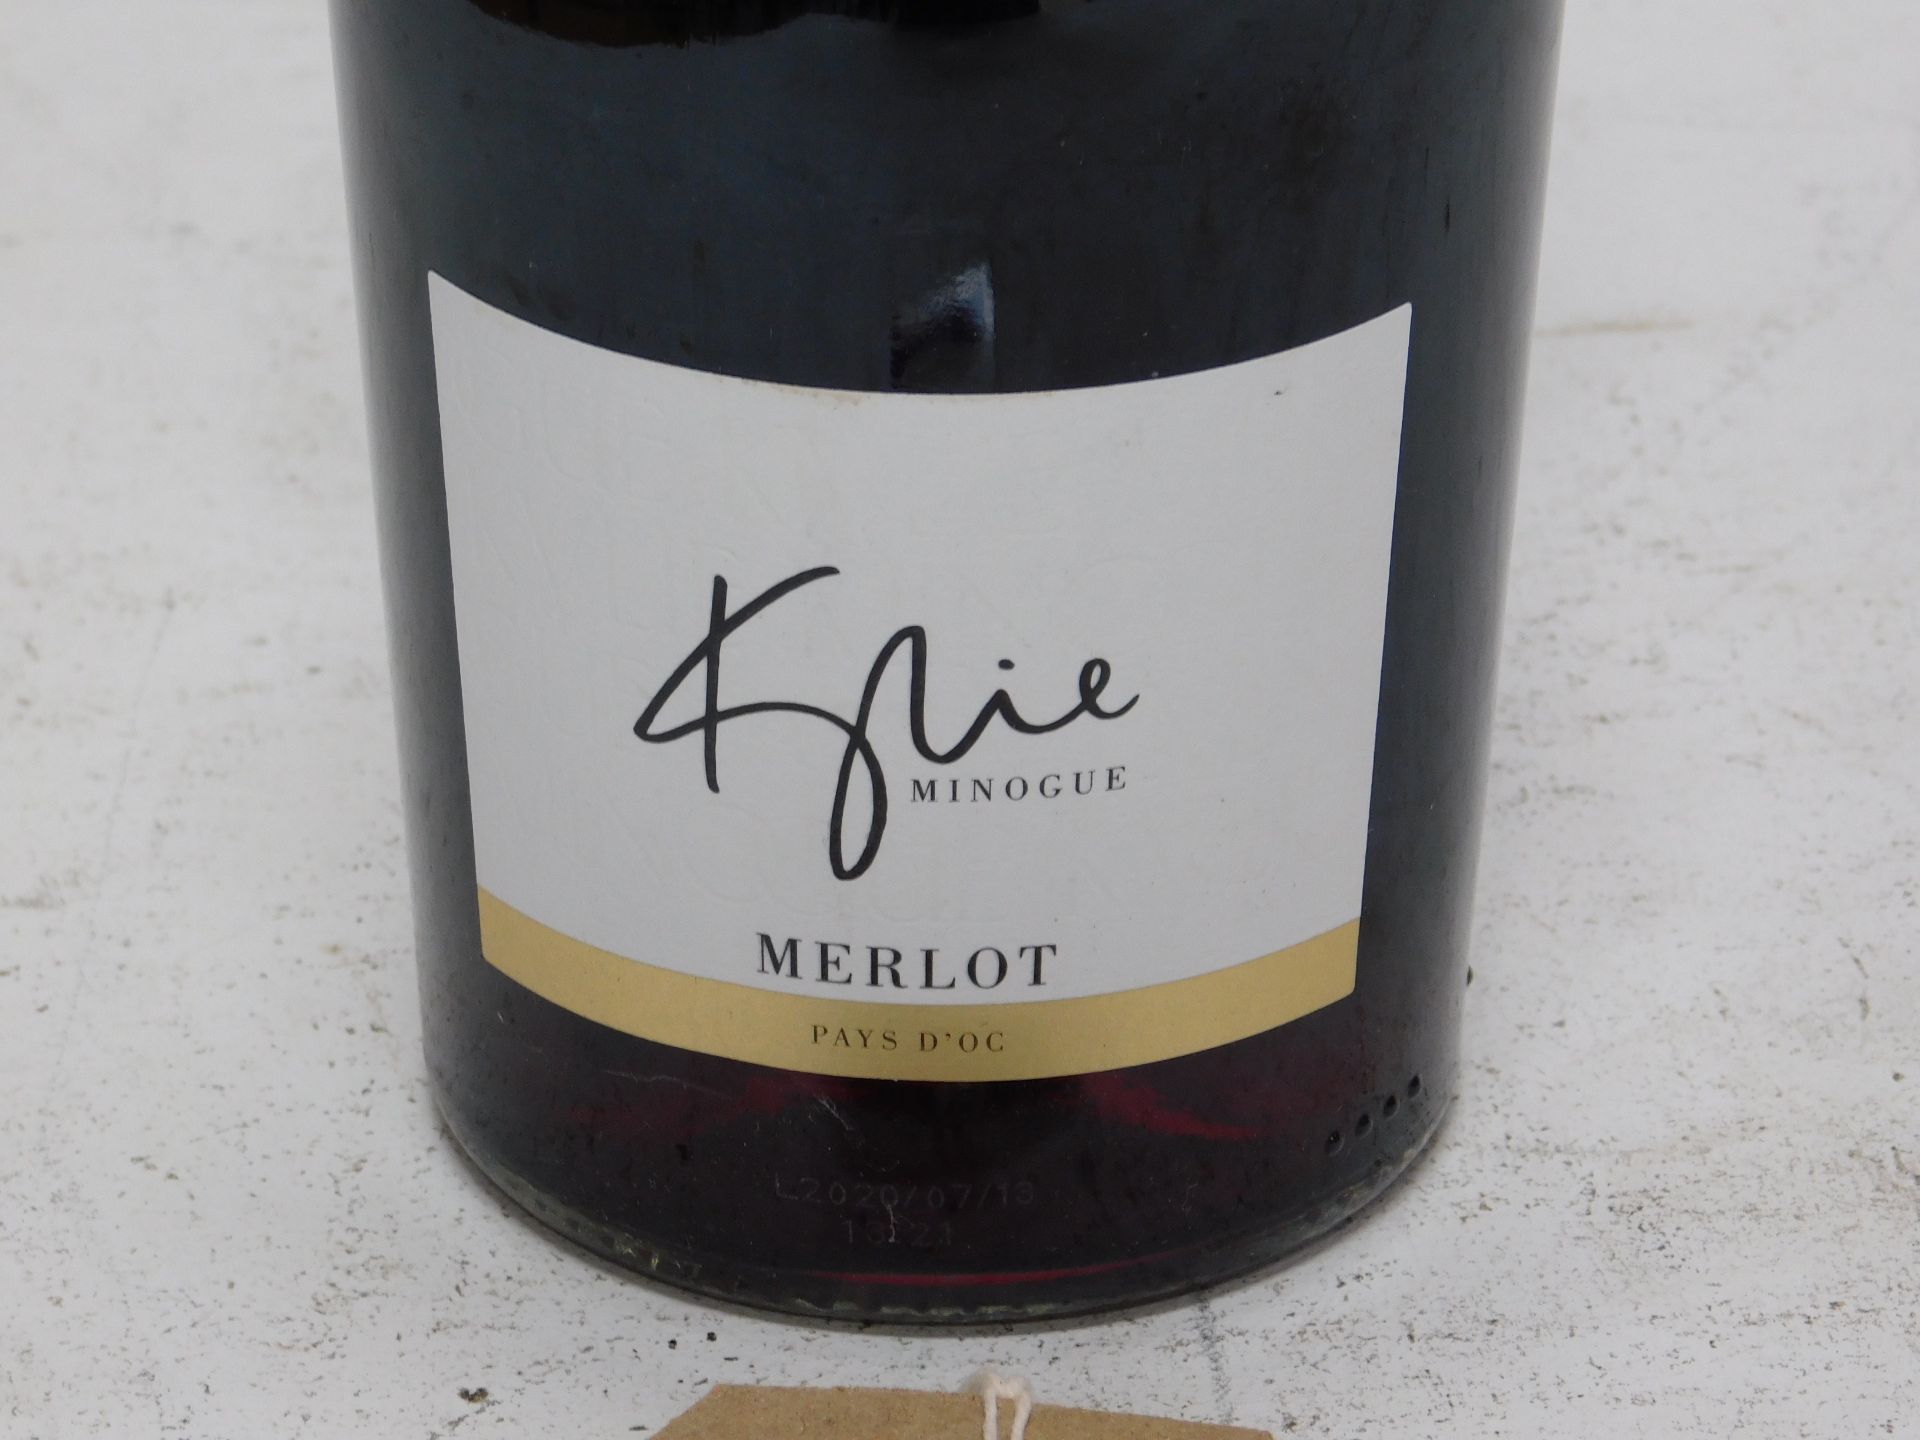 6 Kylie Minogue Pays d’Oc Merlot 2019 (Location: Brentwood. Please Refer to General Notes) - Image 2 of 2